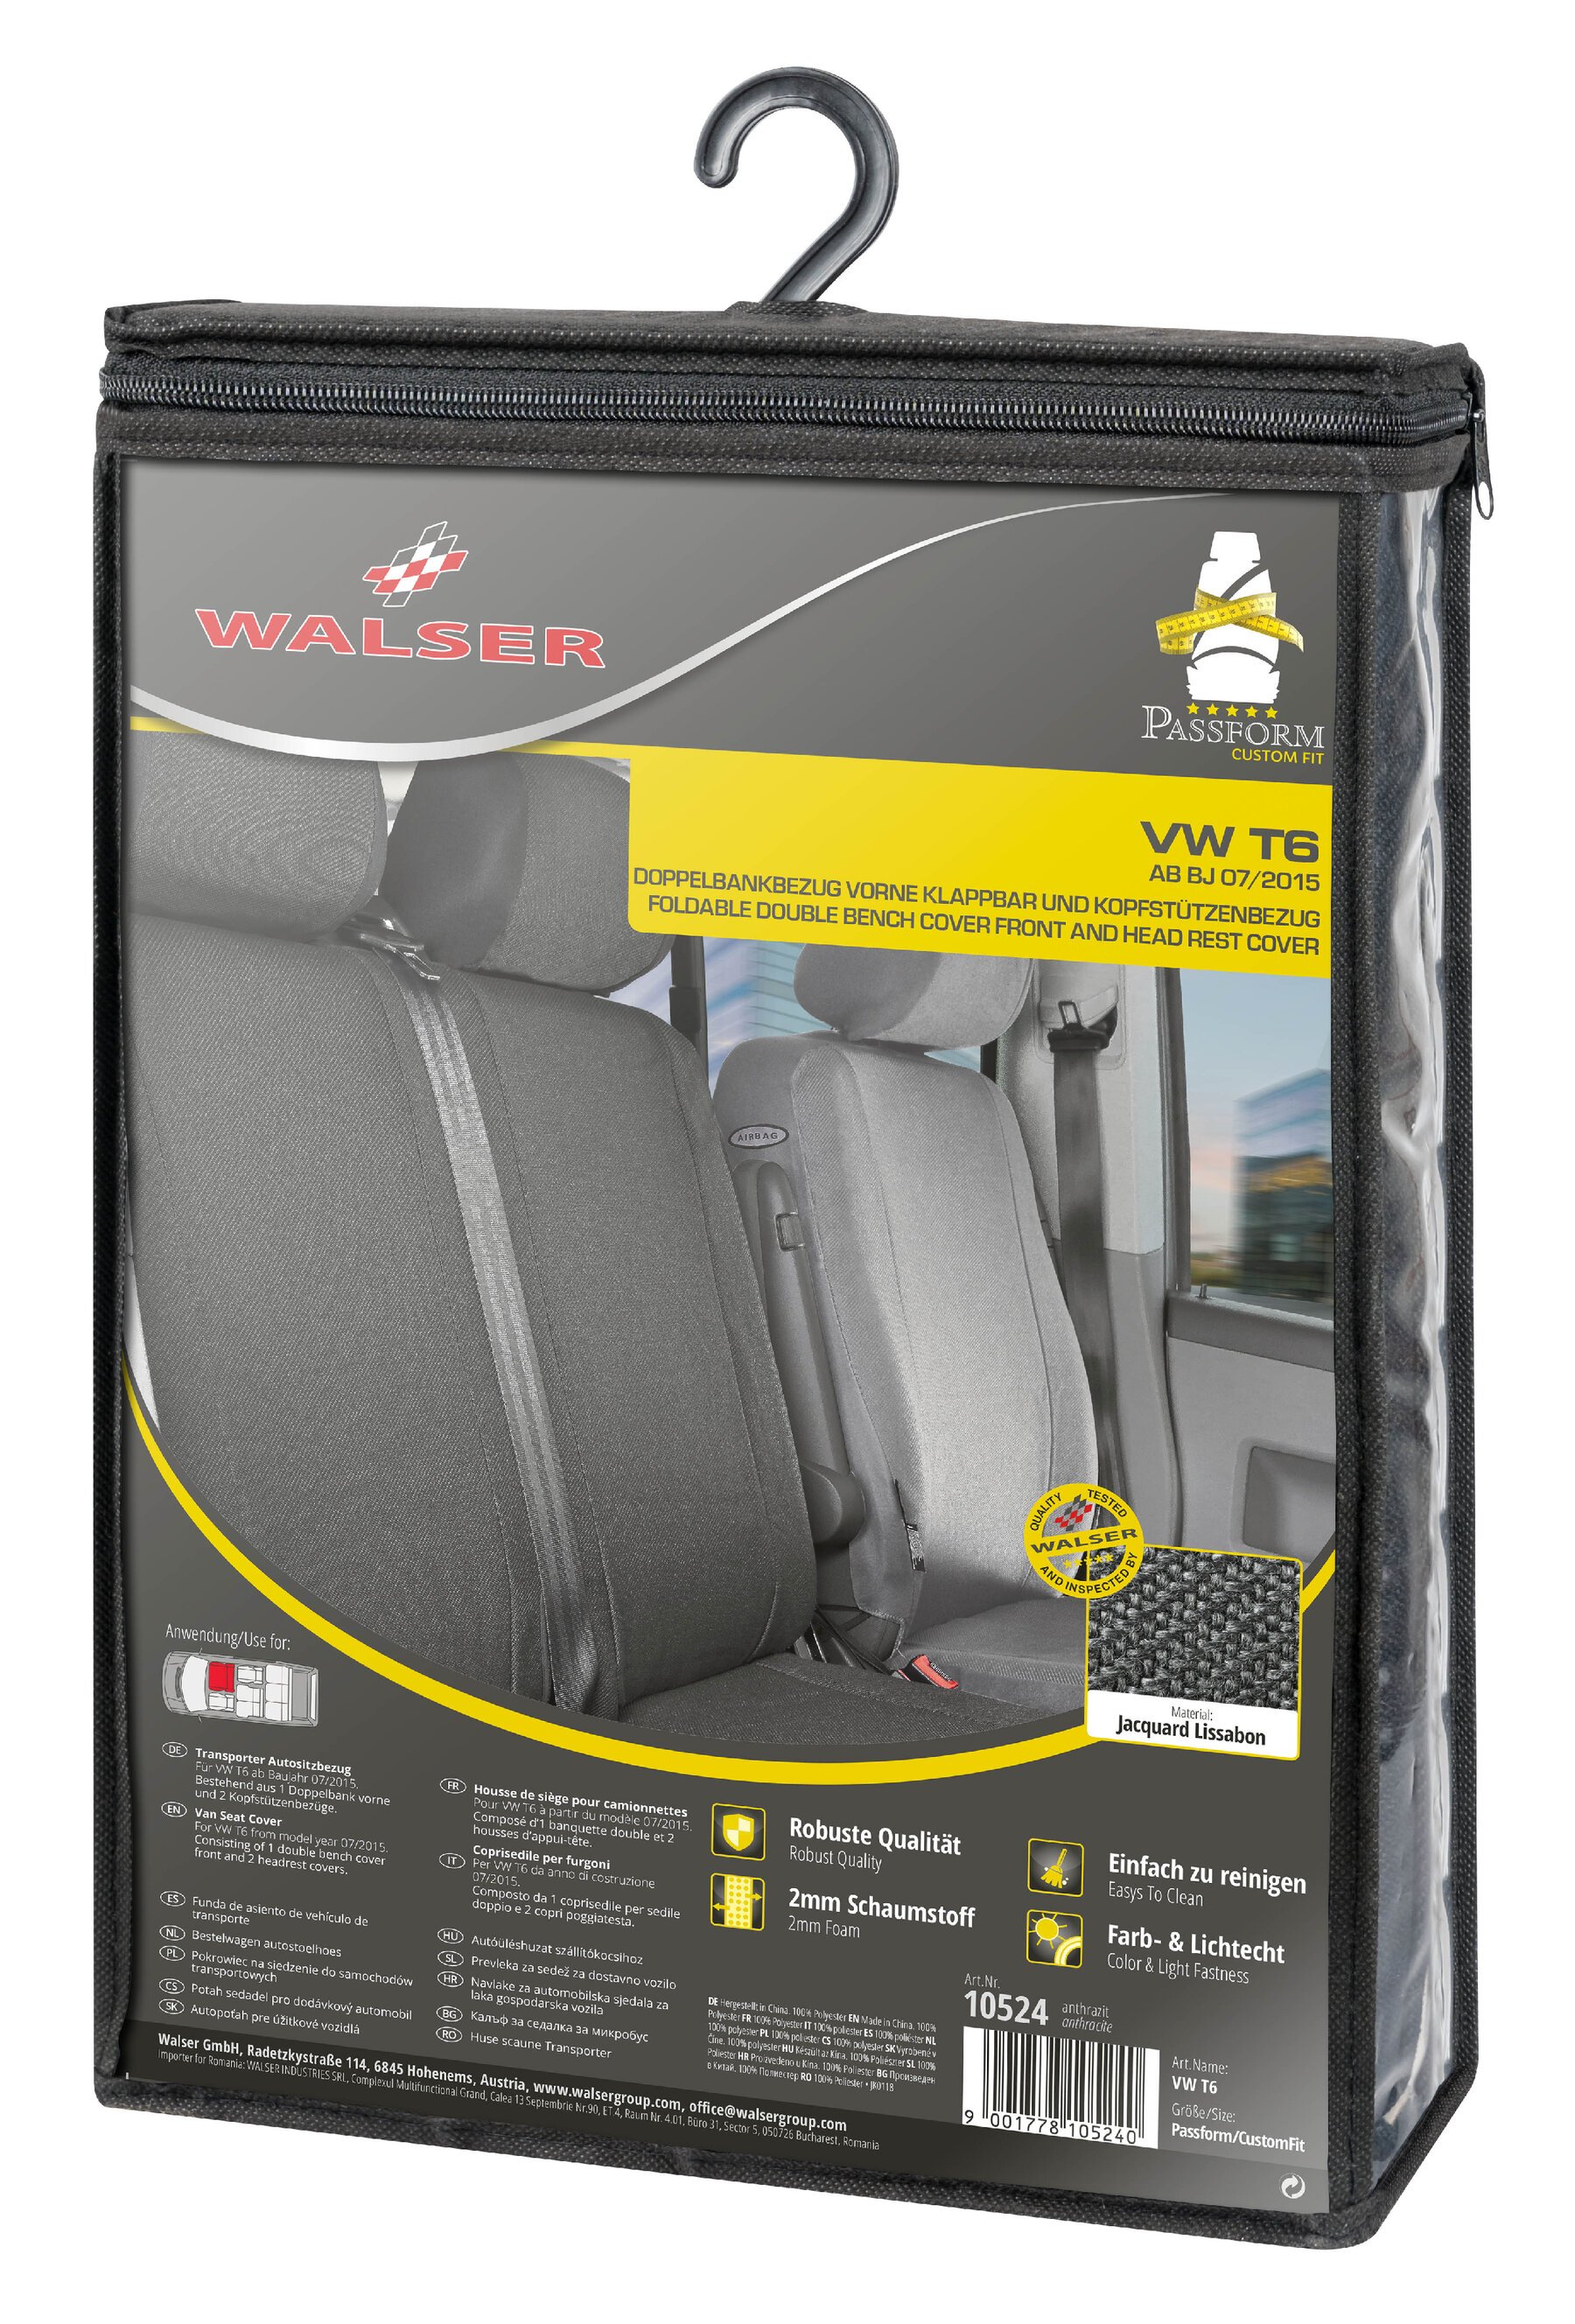 Seat cover made of fabric for VW T6, double bench cover front foldable